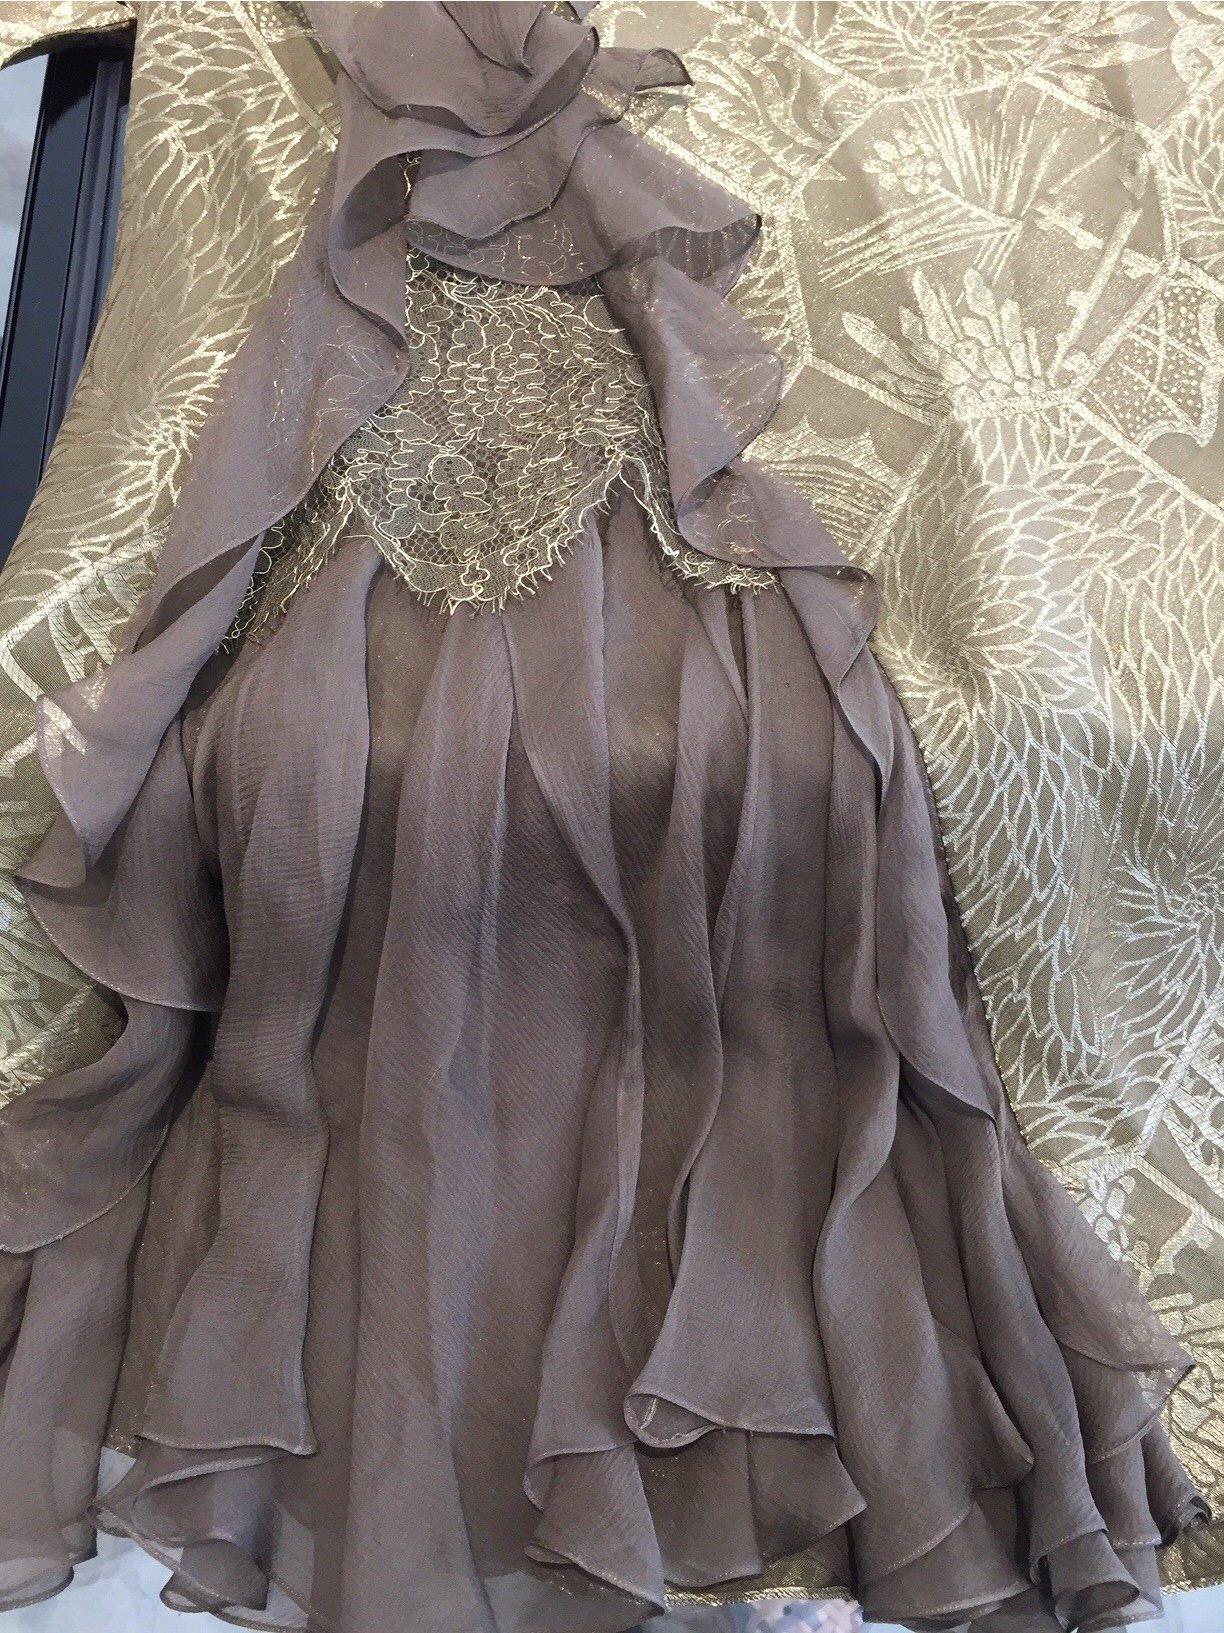 Vintage CHRISTIAN DIOR by John Galliano Gold Metallic Silk Brocade Ruffle Cocktail Dress inpiried by 1930s style. Covered silk button on the side. Spaghetti strap and ruffle on the side and bust line.
Fit US 6 / MEDIUM
BUST: 36 inch / Waist: 32 inch